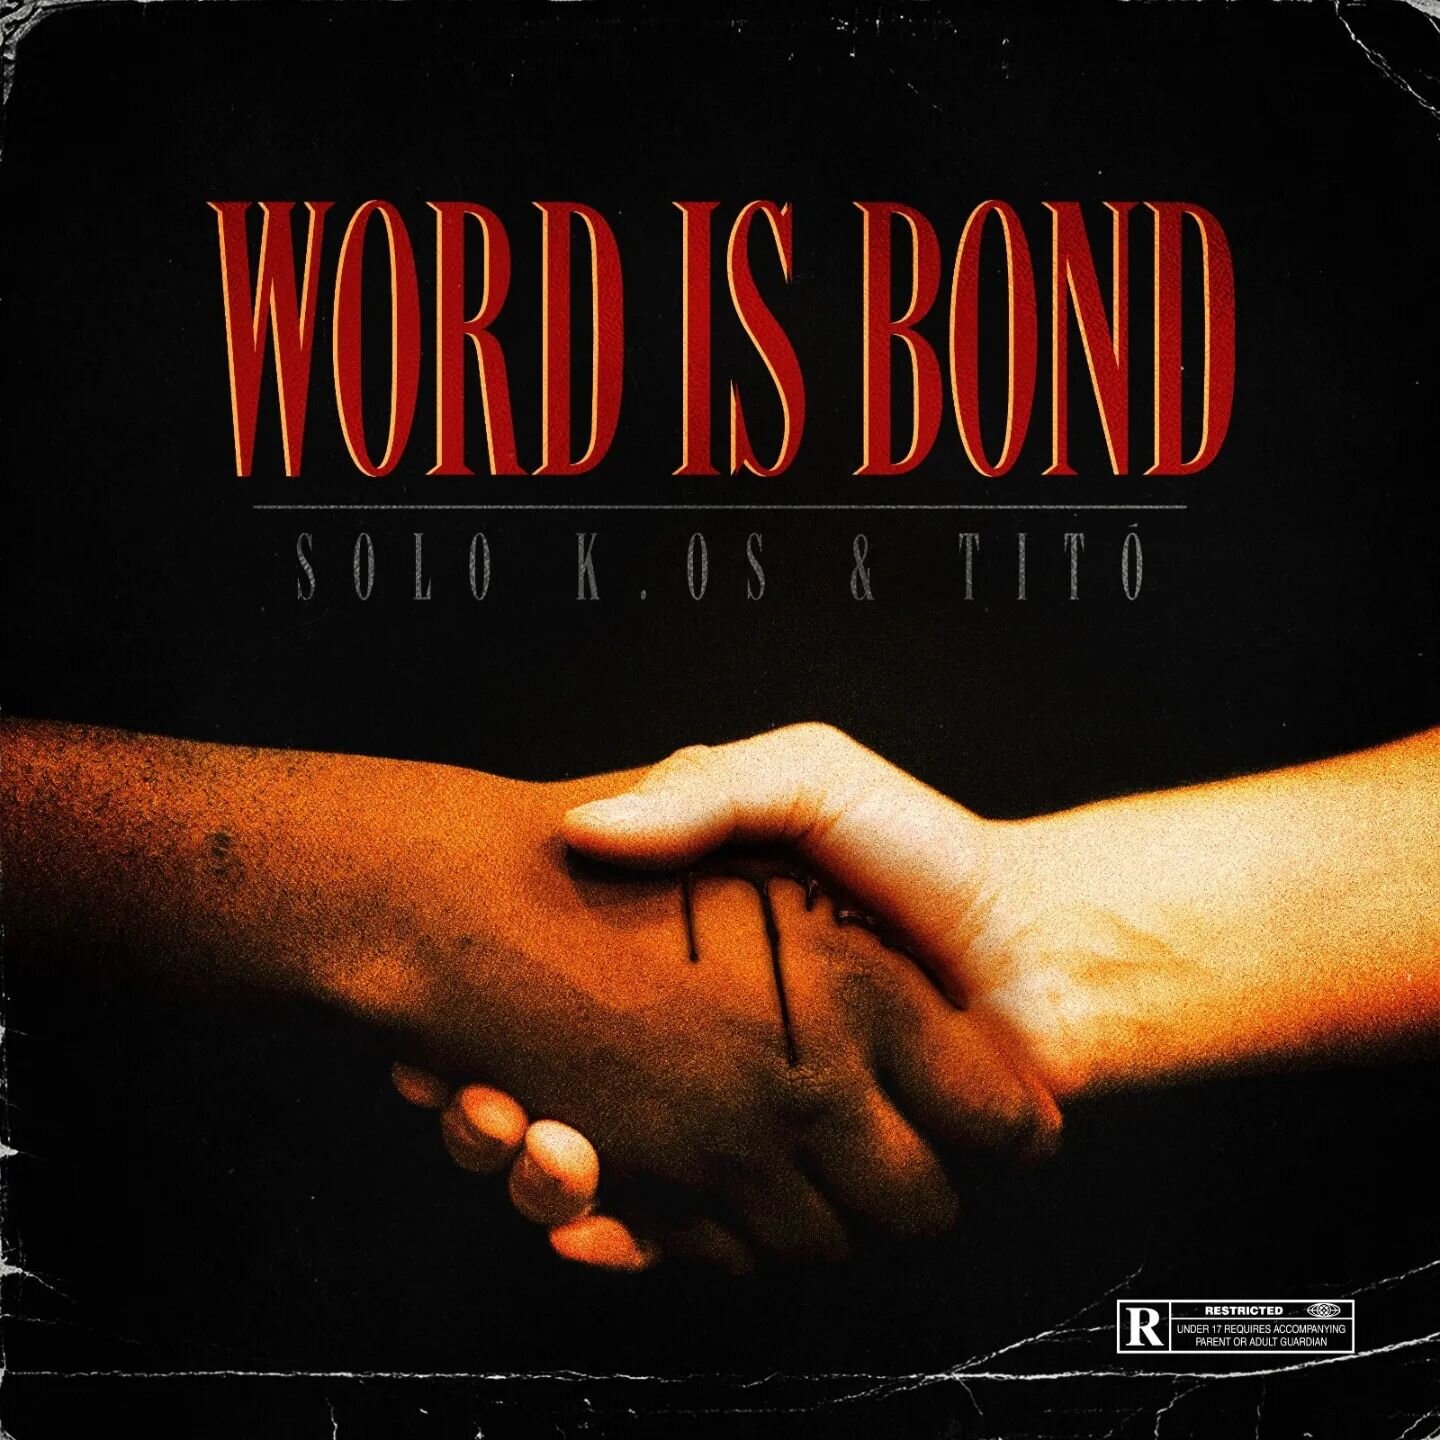 Word_is_bond_solo_k.os_tit_